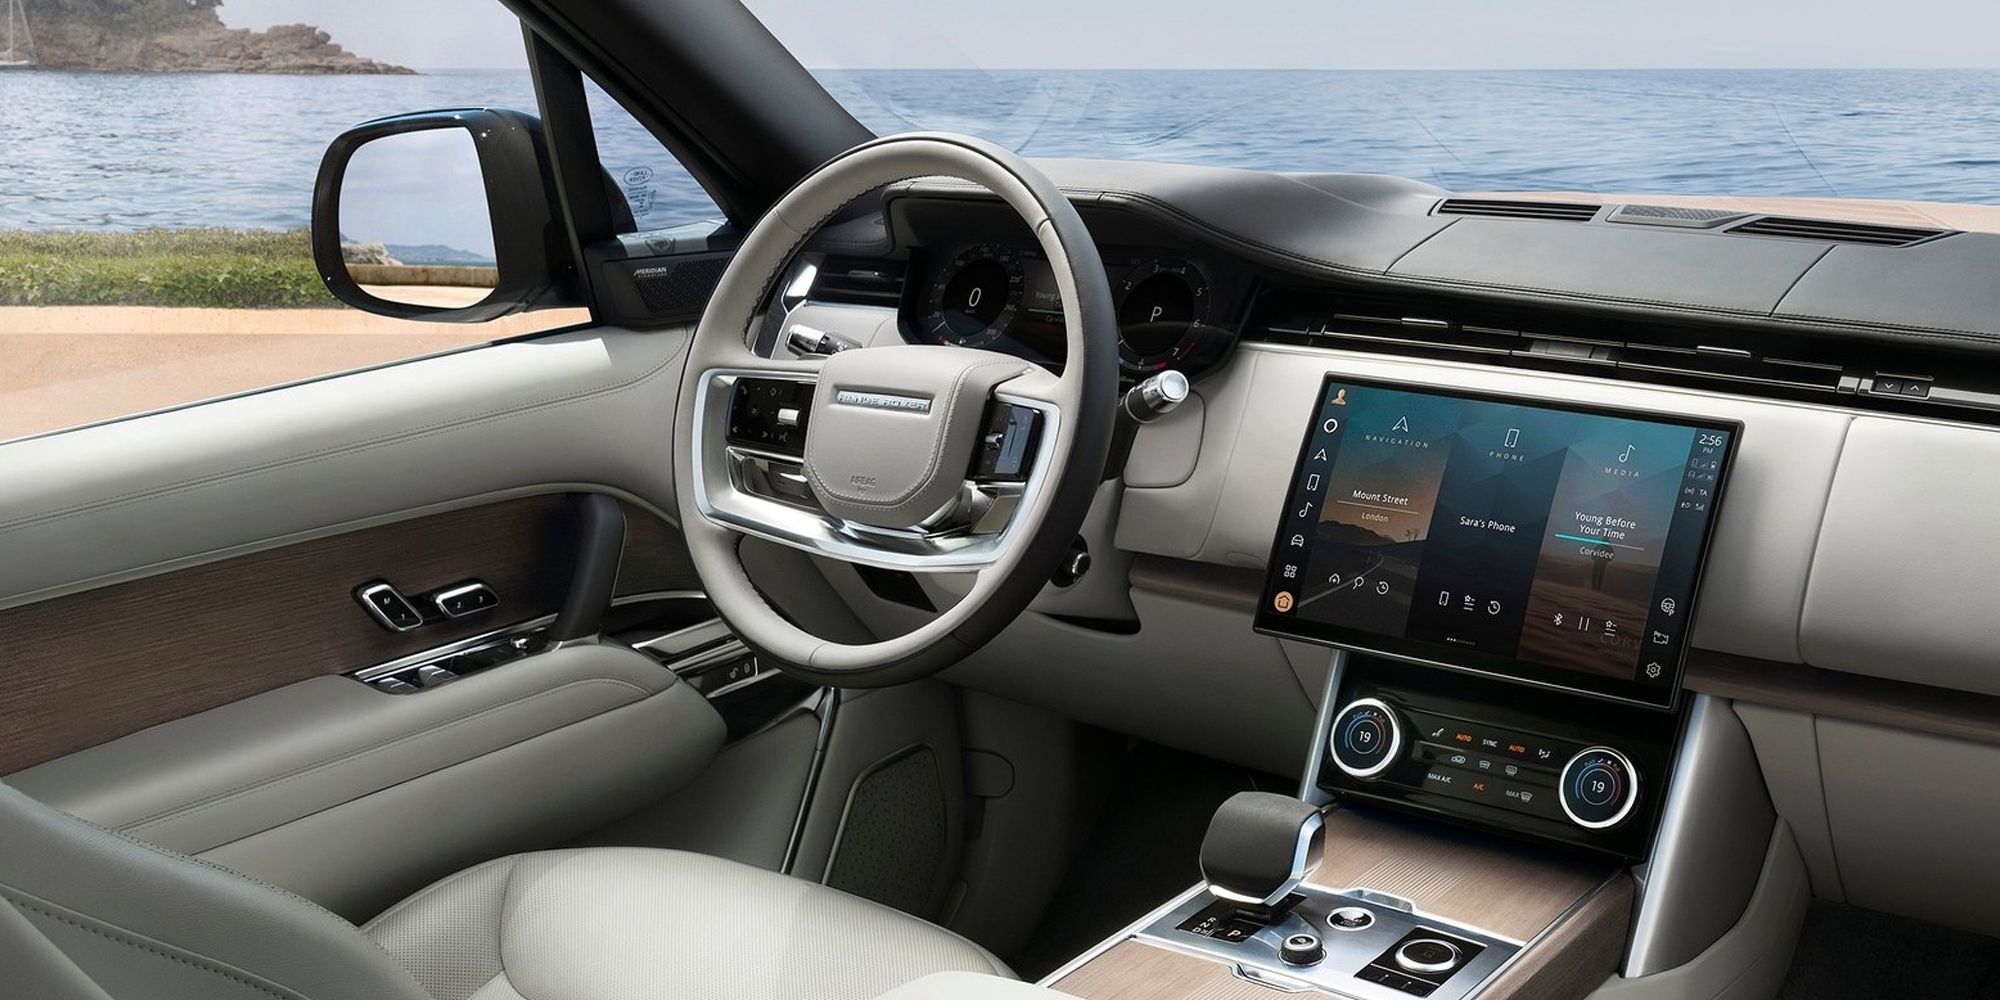 The interior of the new Range Rover, white leather